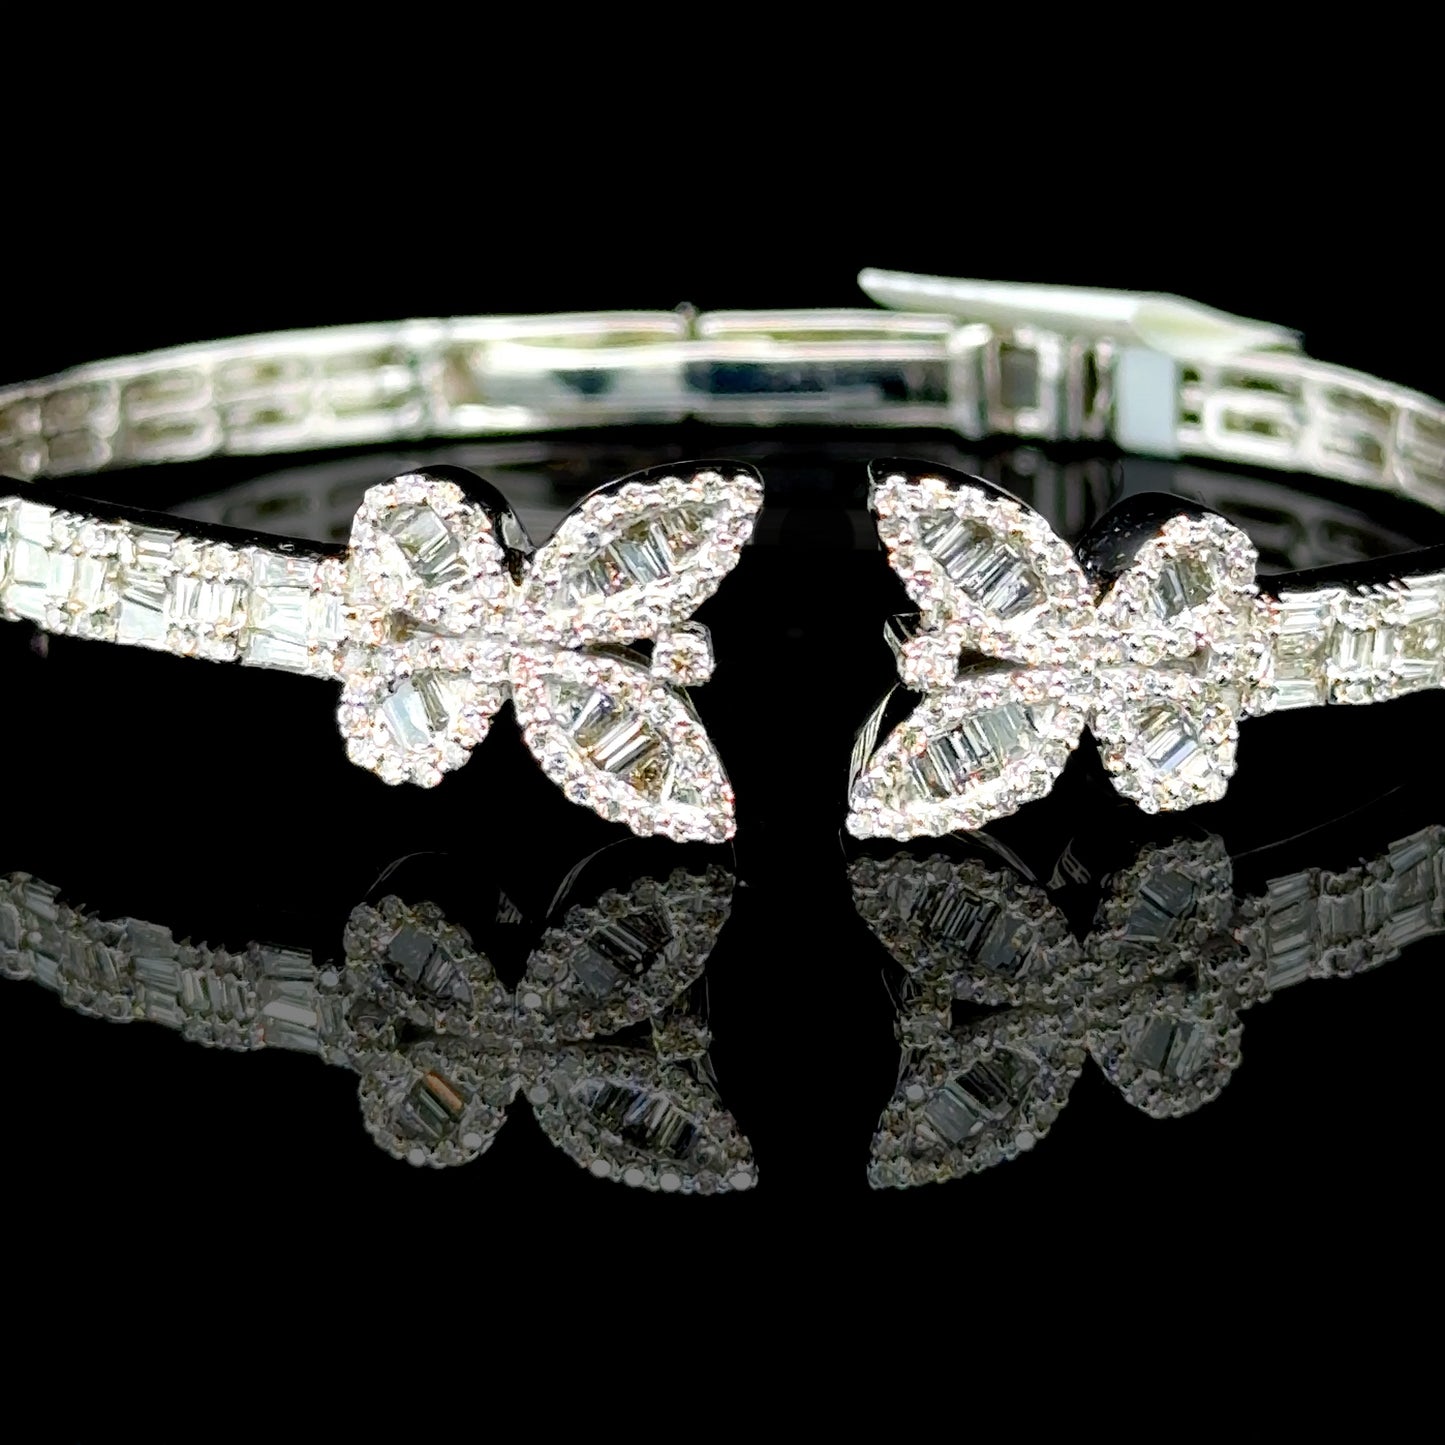 Luxury diamond bangle in white gold with a butterfly design